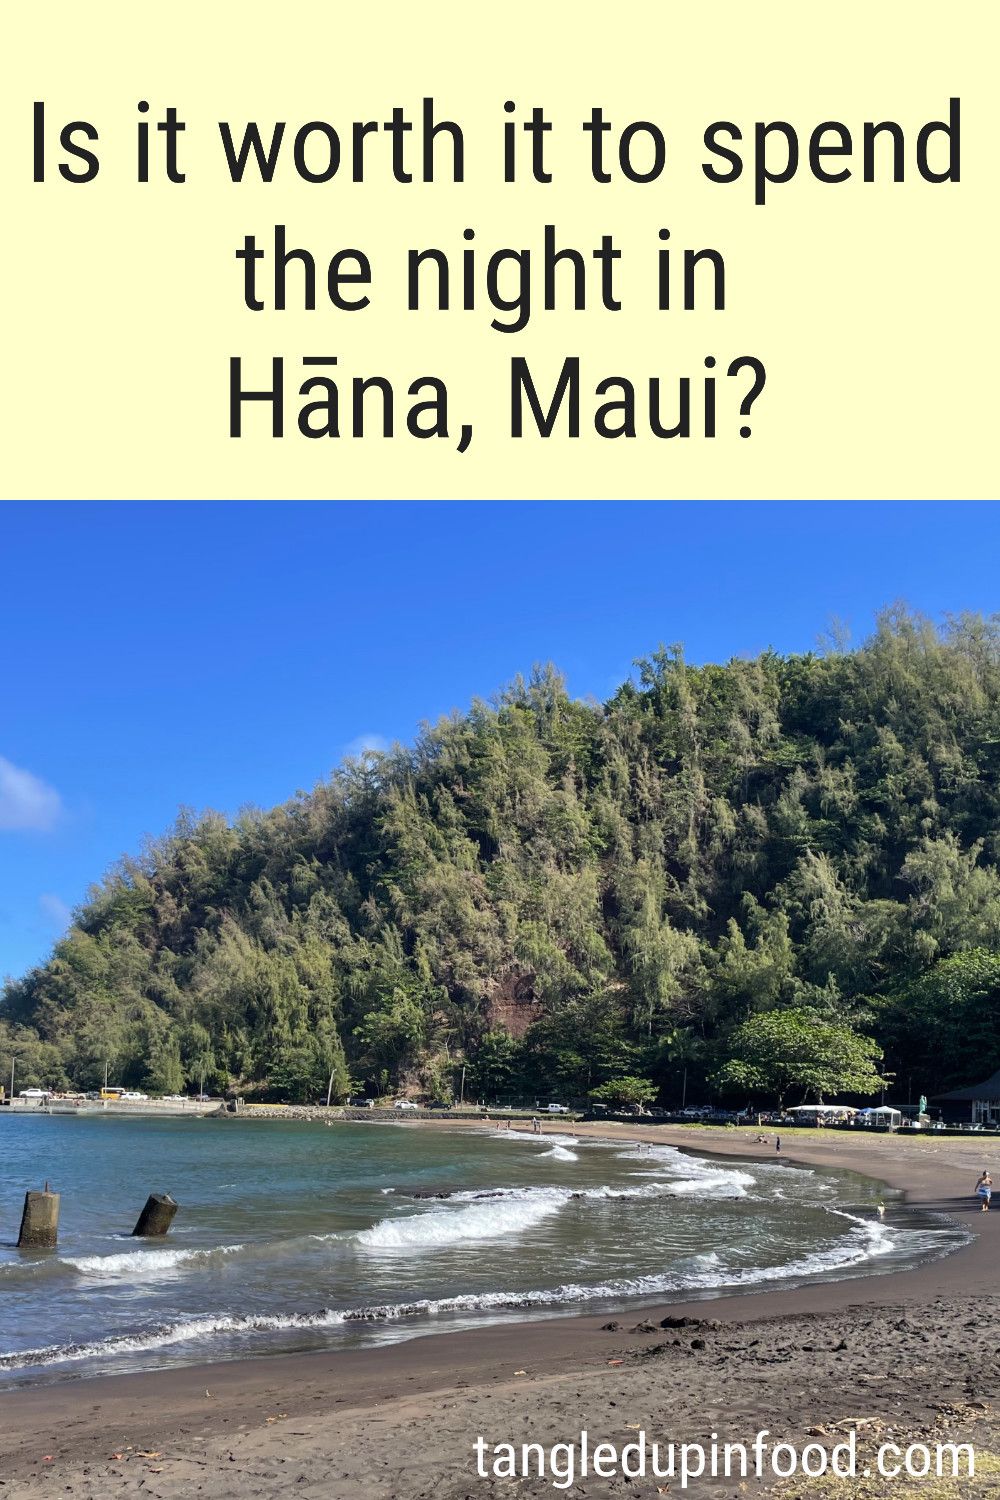 Photo of a sandy beach and text reading "Is it worth it to spend the night in Hana, Maui?"